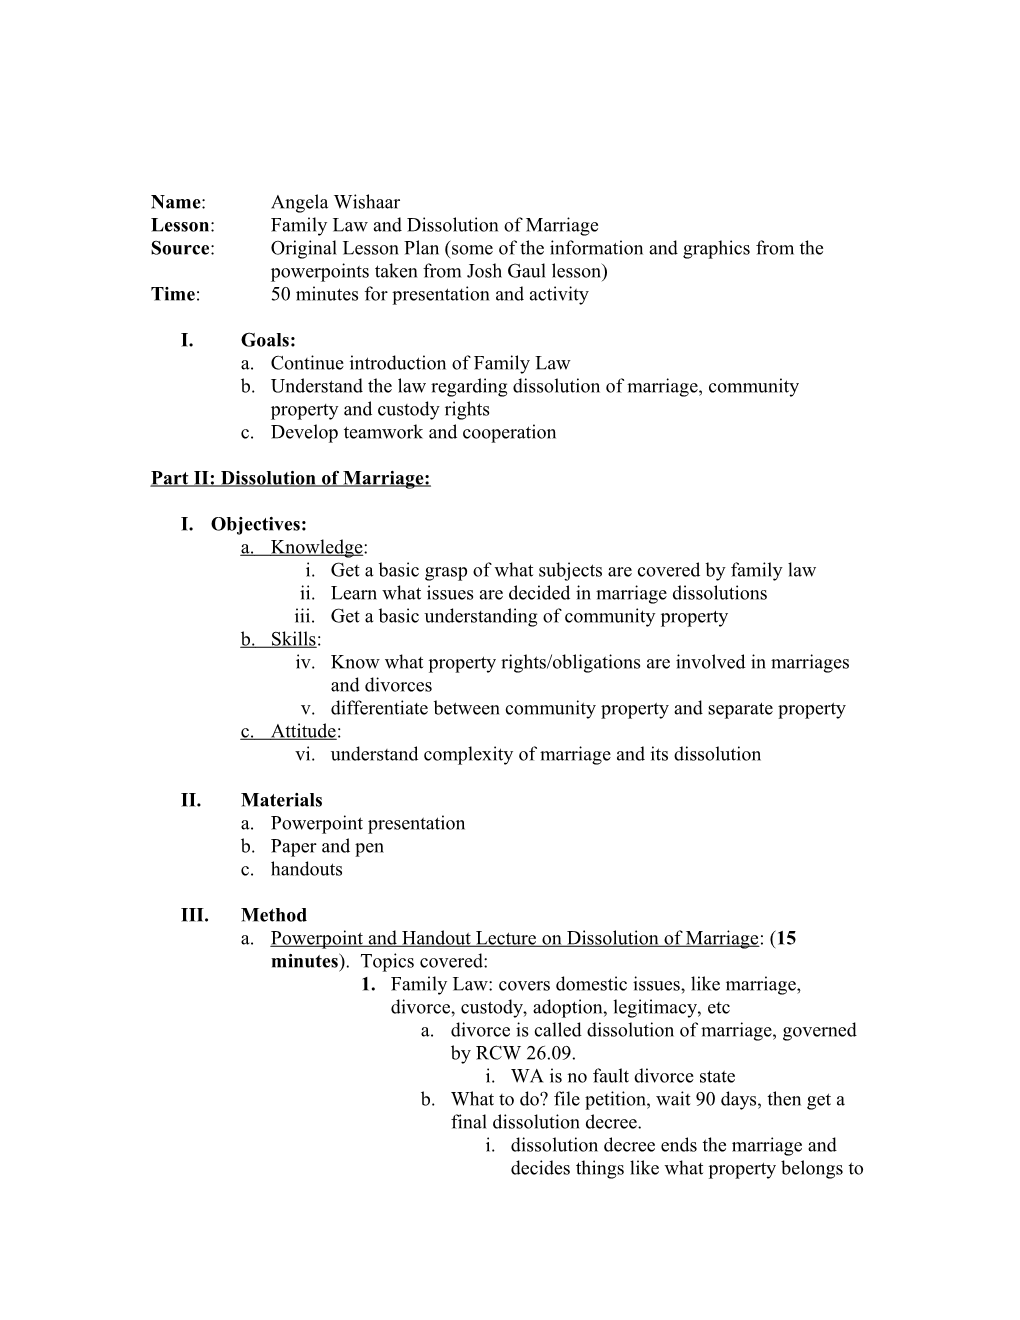 Lesson:Family Law and Dissolution of Marriage